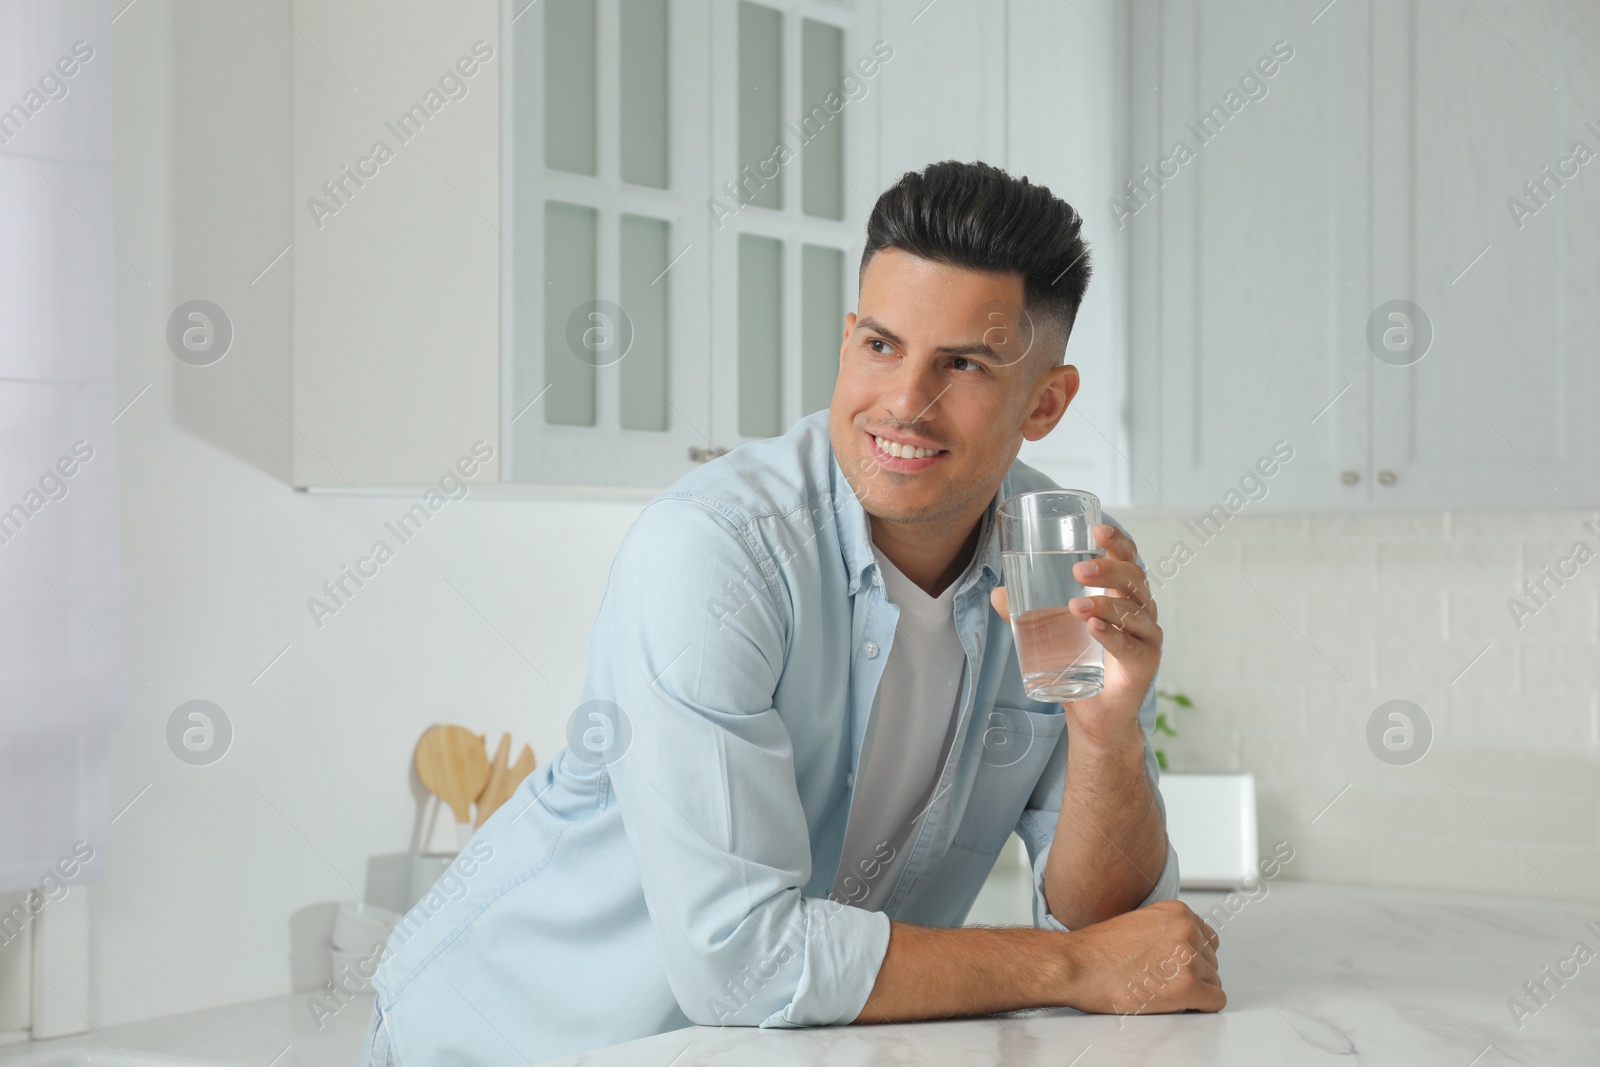 Photo of Man with glass of tap water in kitchen